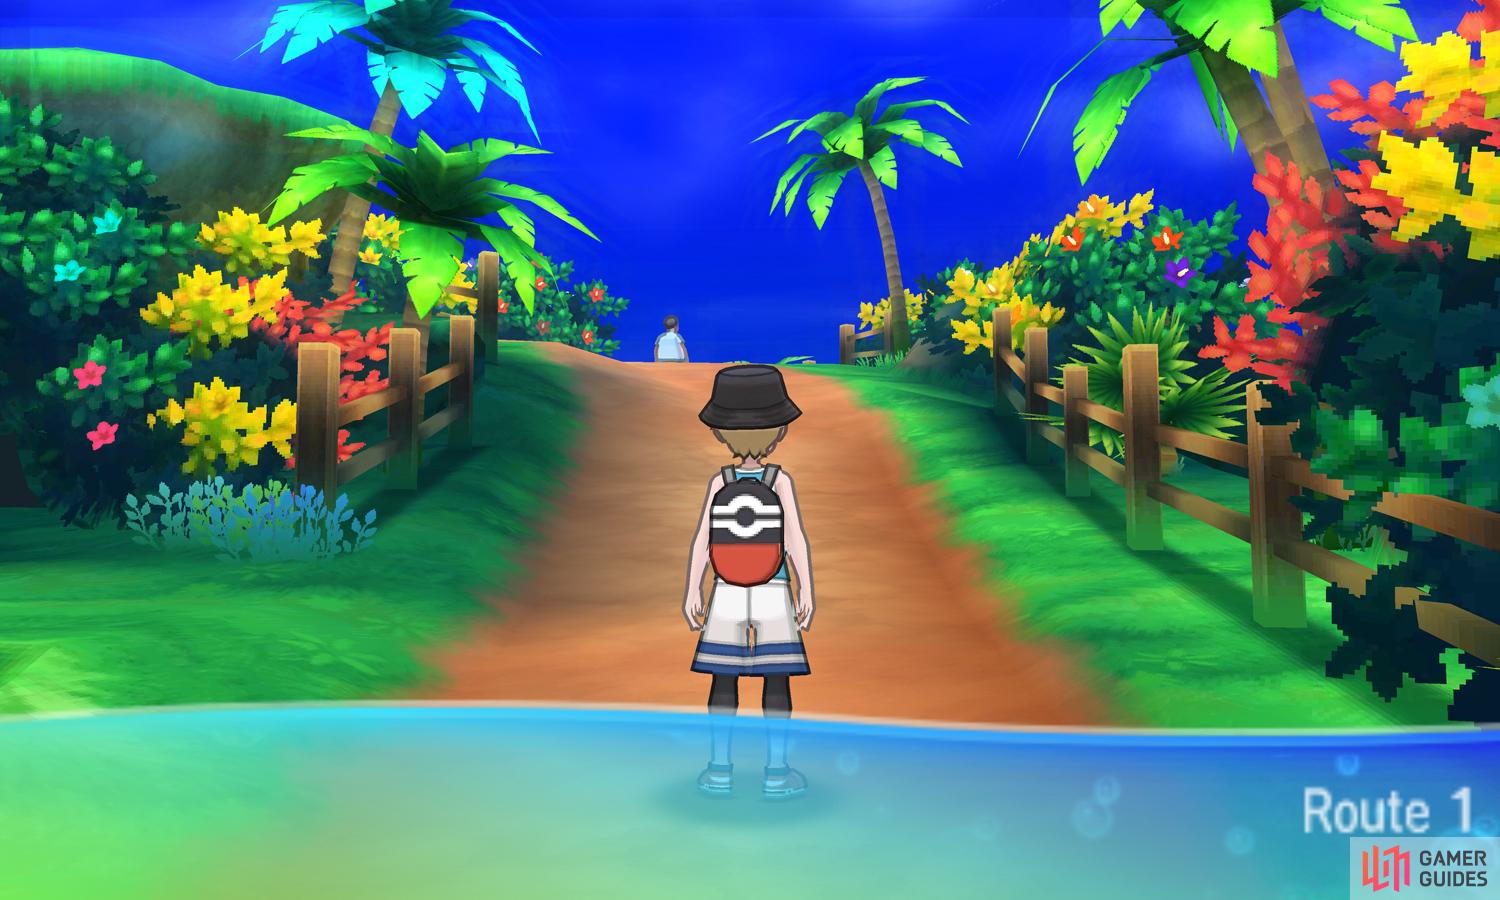 Pokemon: All the Similarities and Differences Between Sun/Moon and Ultra Sun /Ultra Moon